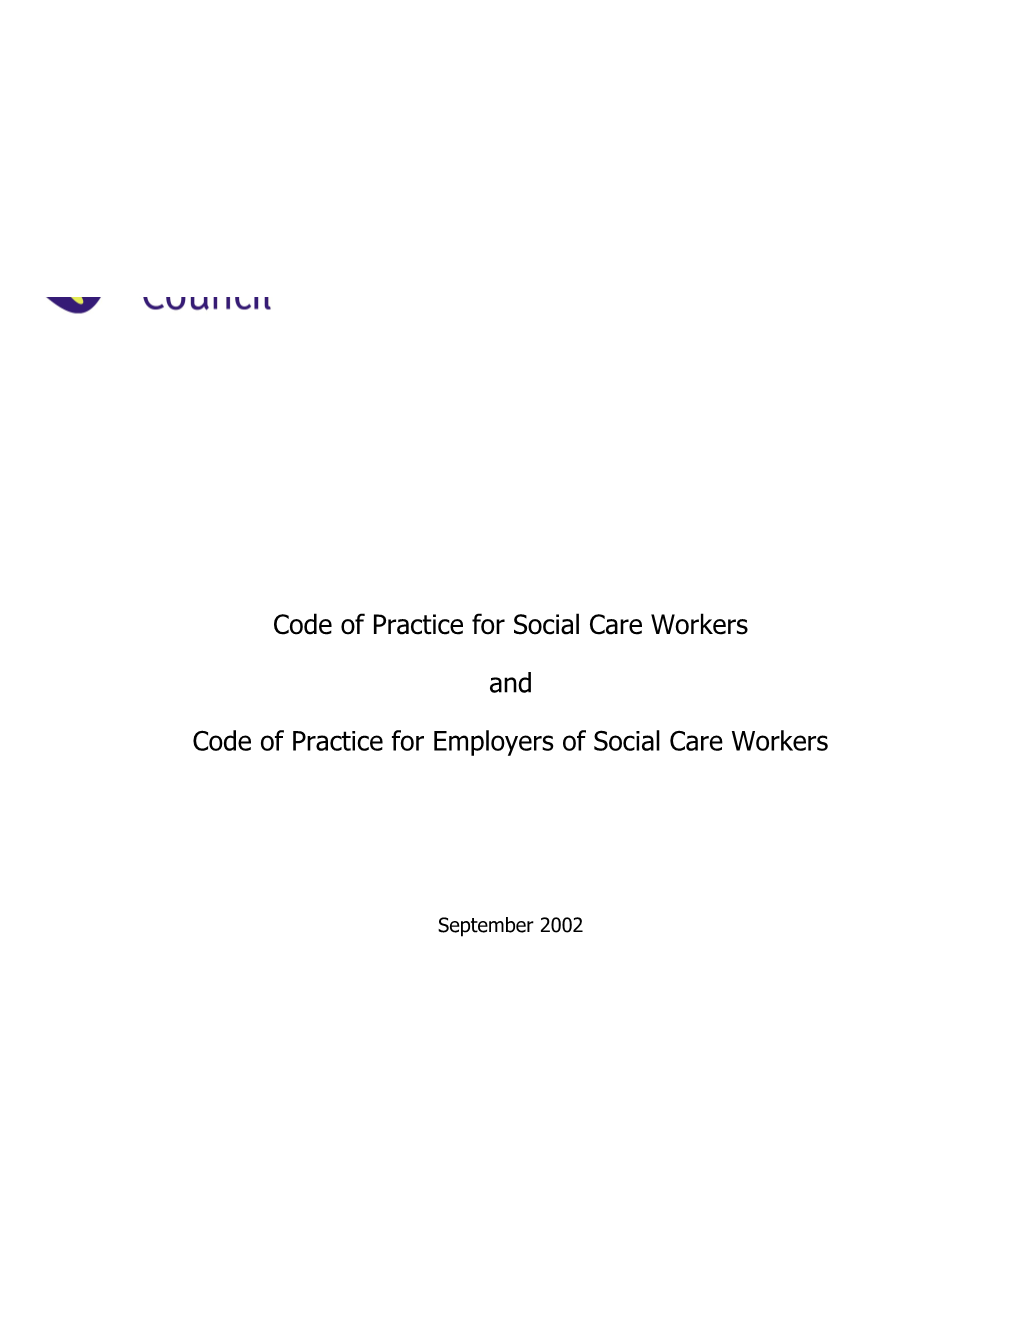 Codes of Practice for Social Care Workers and Employers